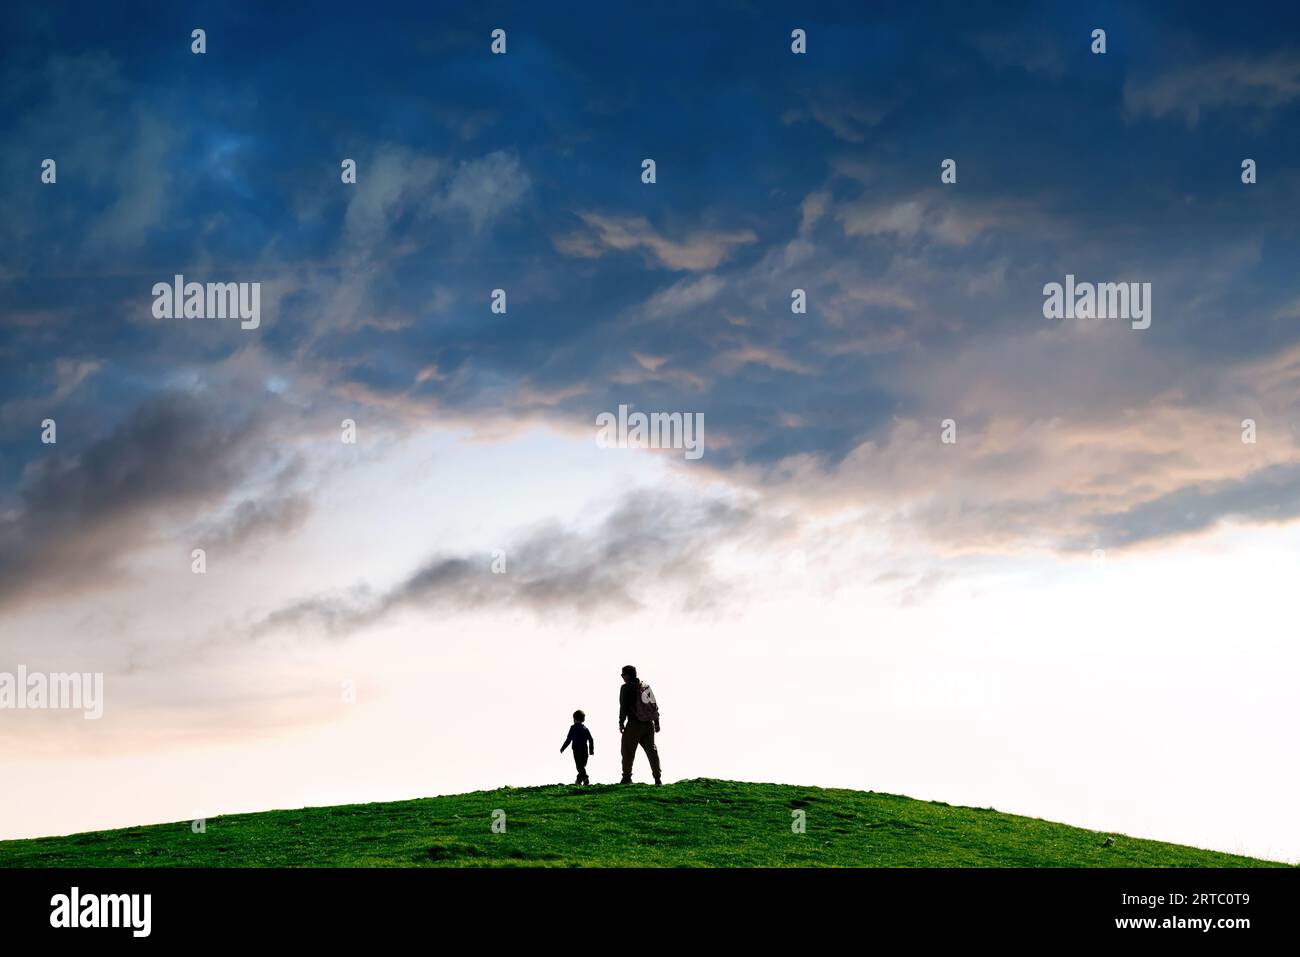 Silhouette of a person following child against minimalist landscape Stock Photo